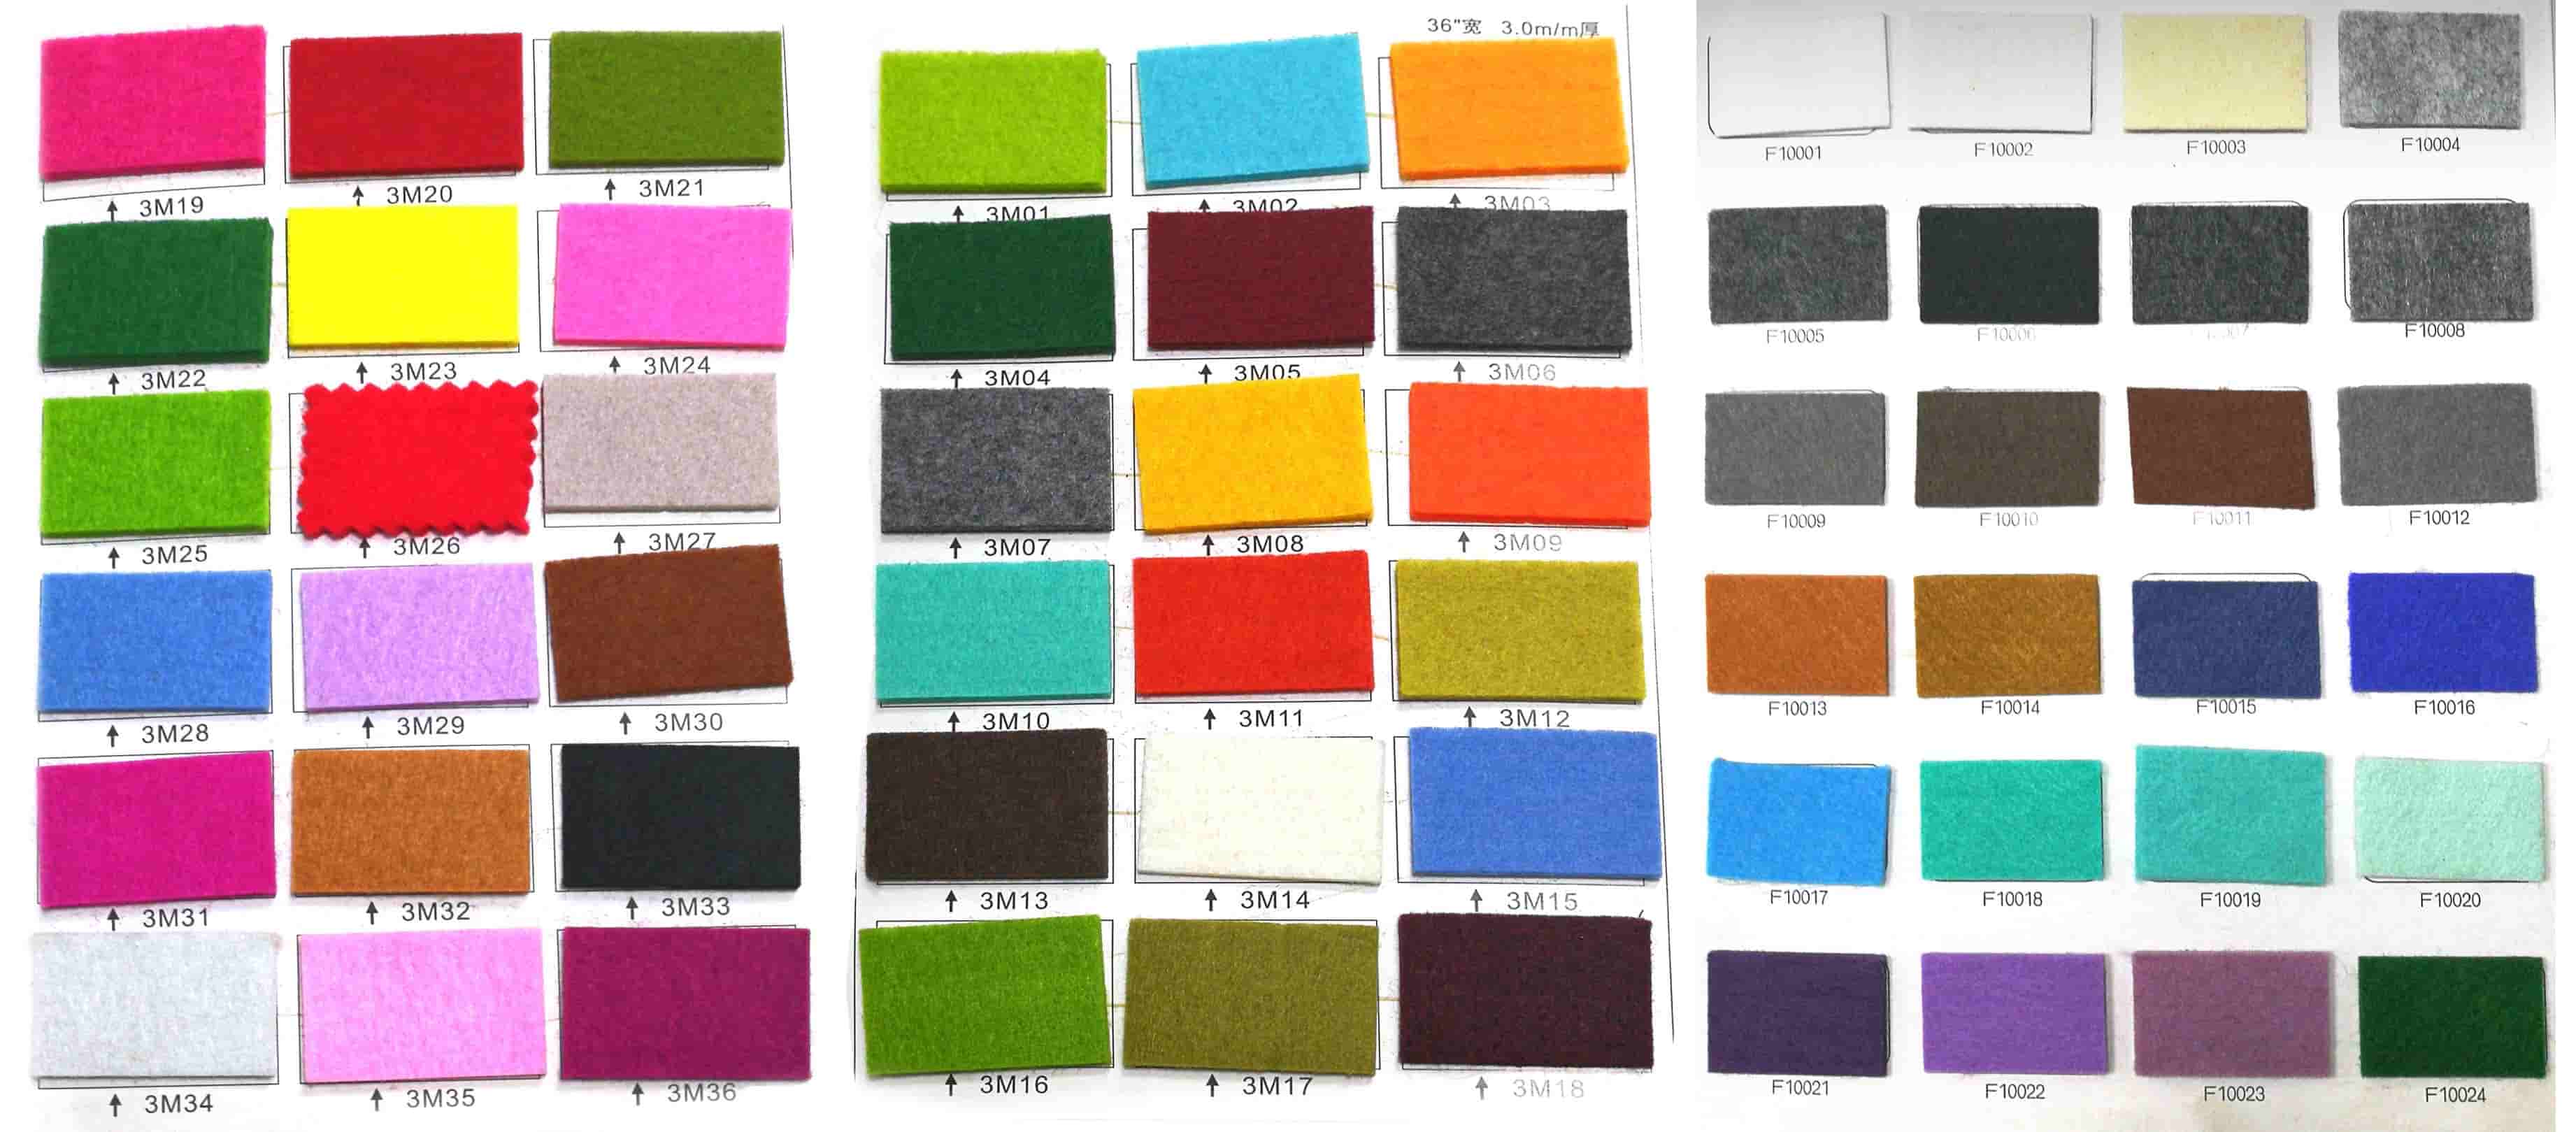 Felt color charts for reference.